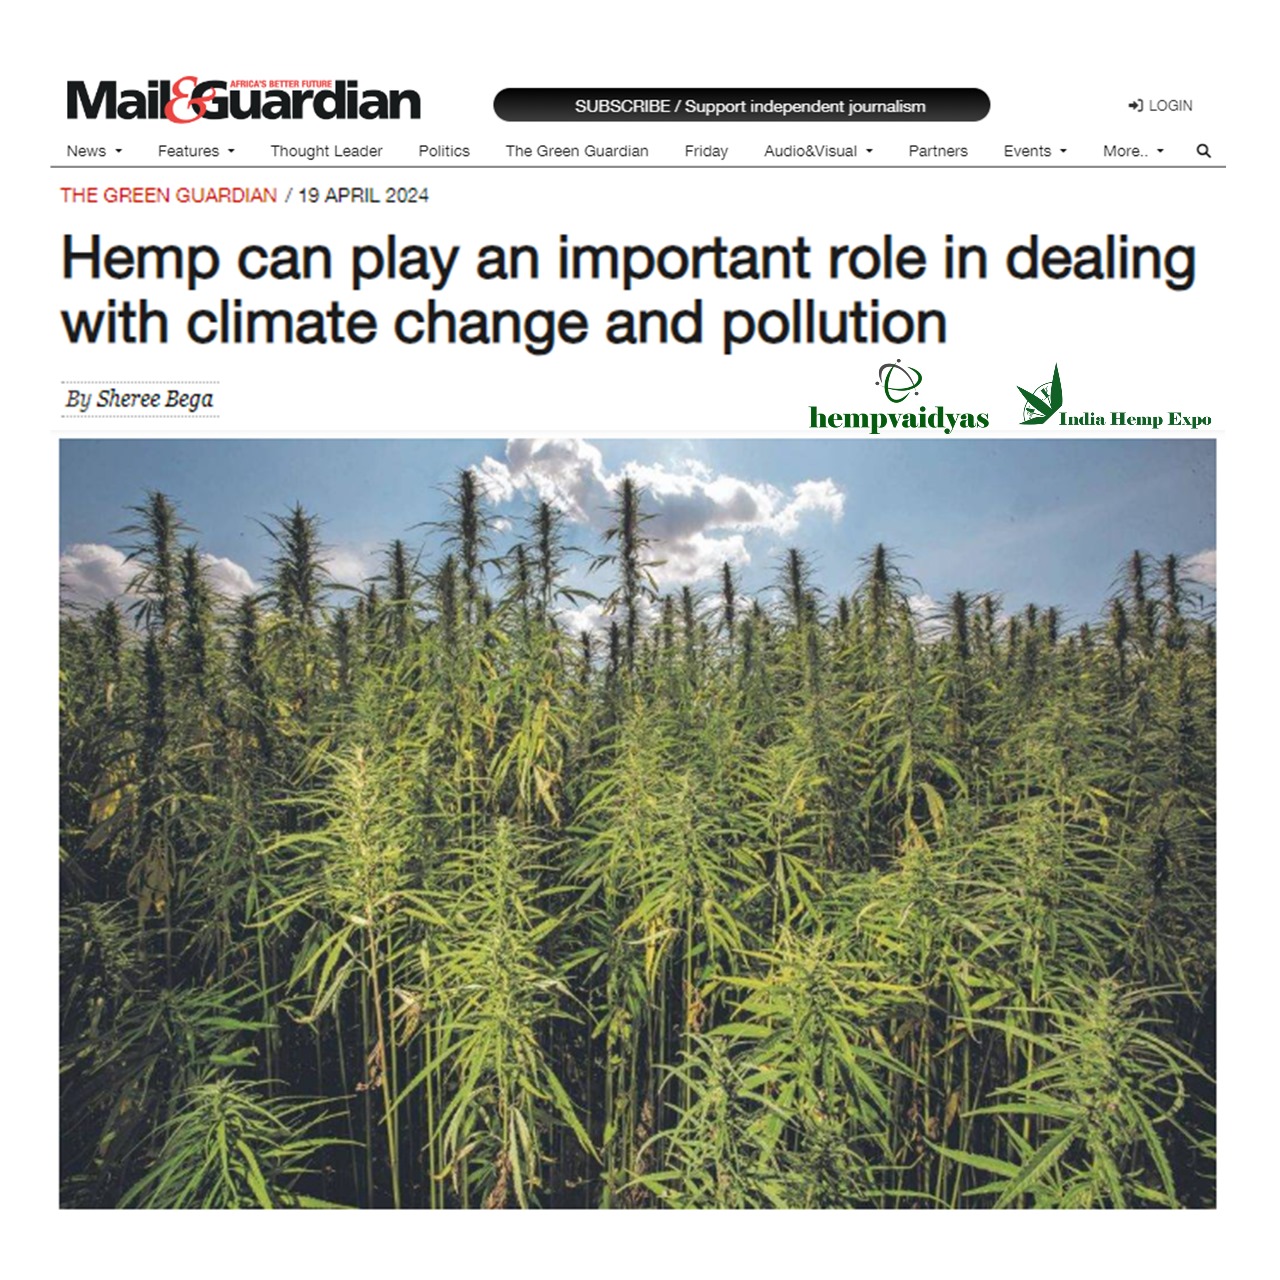 Hemp can play an important role in dealing with climate change and pollution